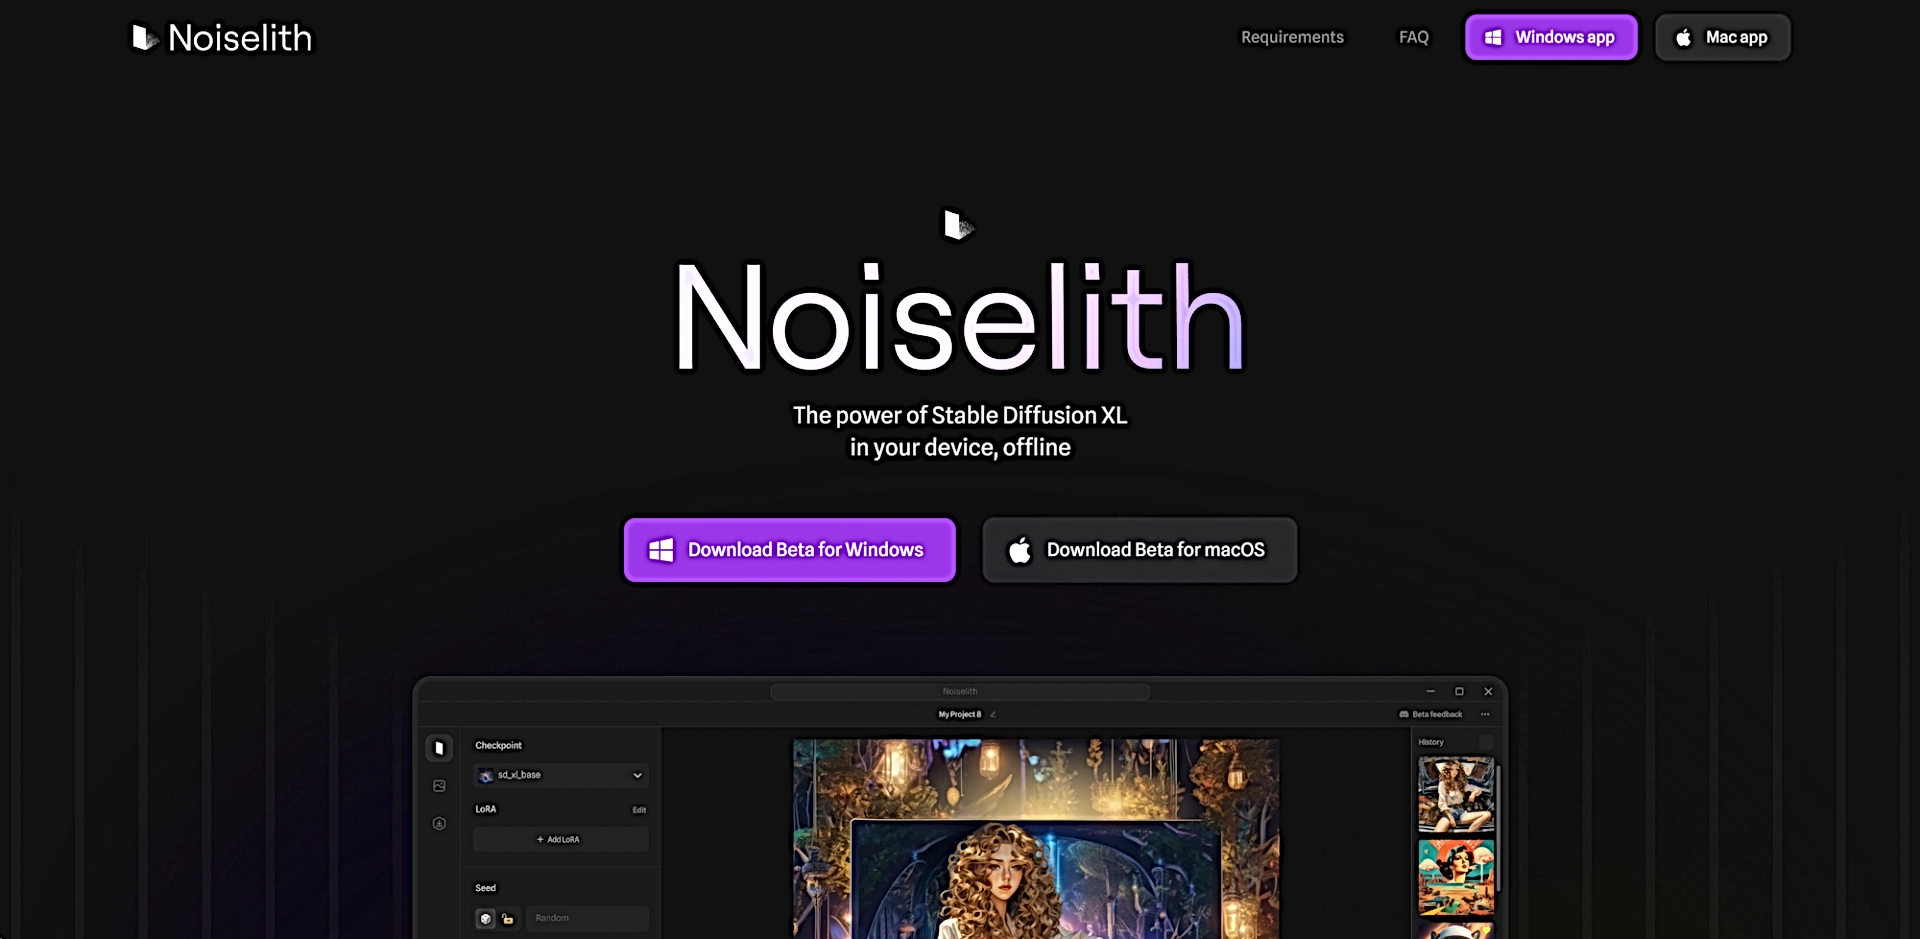 Noiselith featured